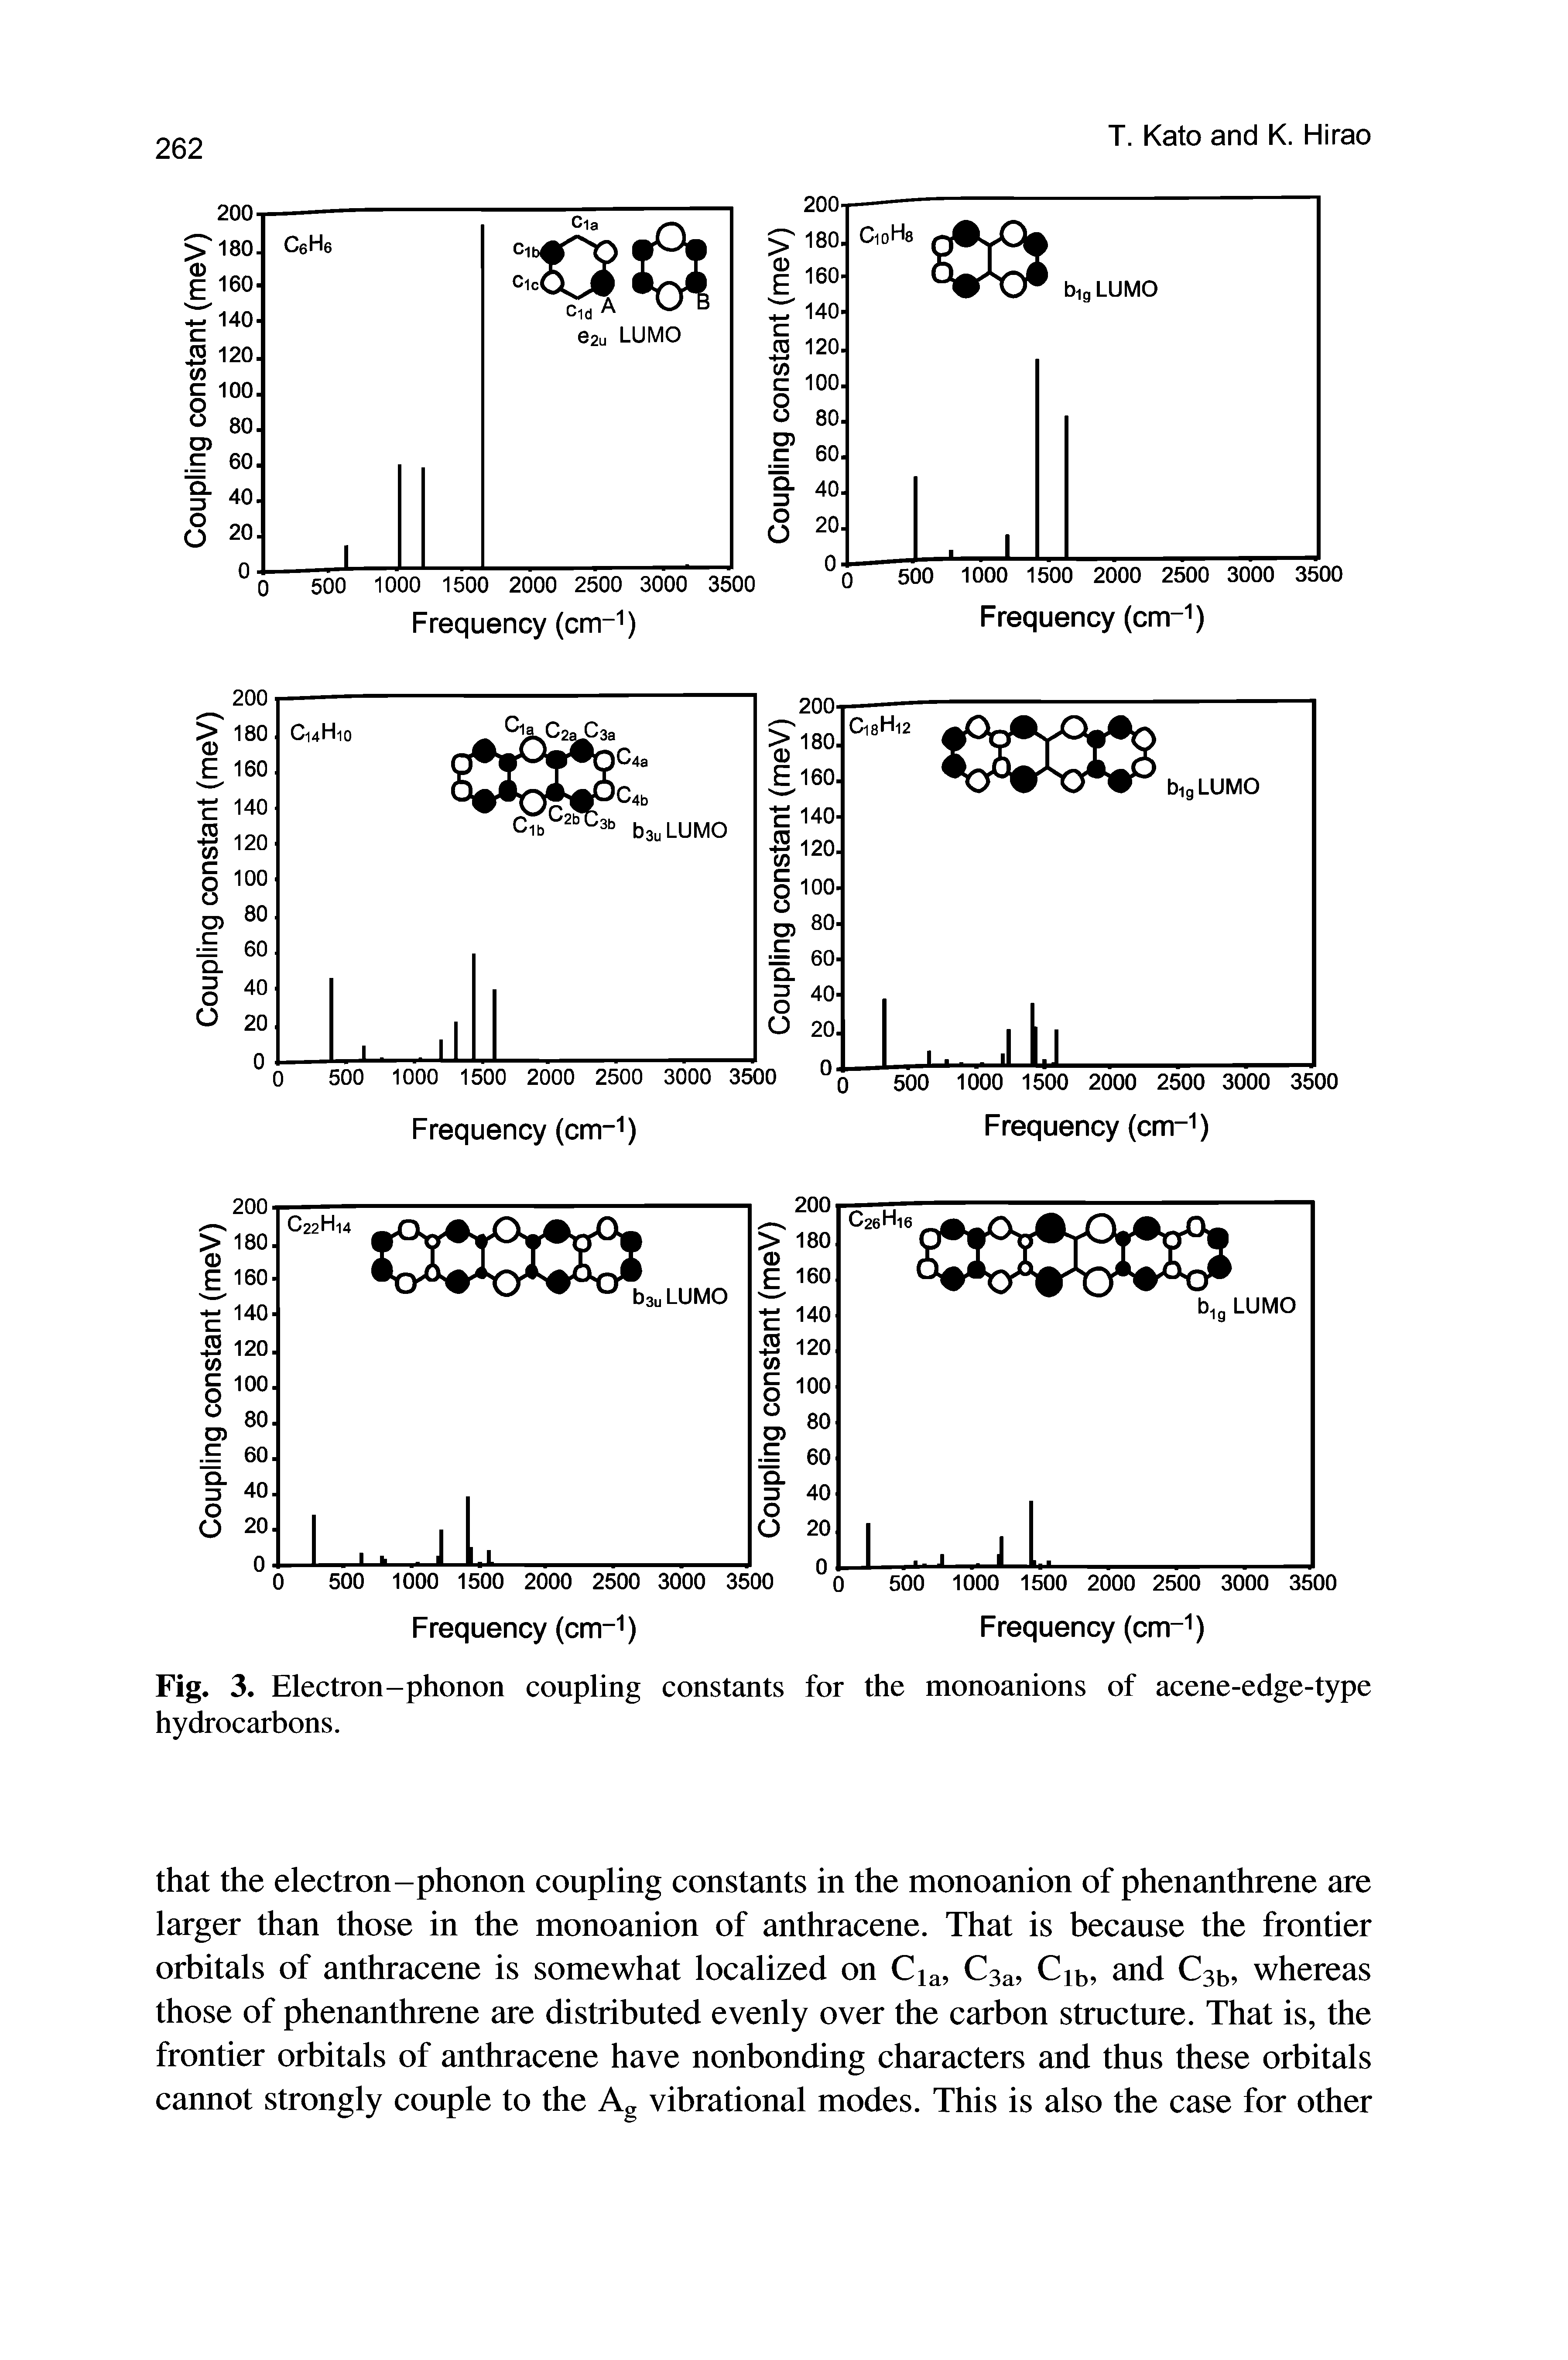 Fig. 3. Electron-phonon coupling constants for the monoanions of acene-edge-type hydrocarbons.